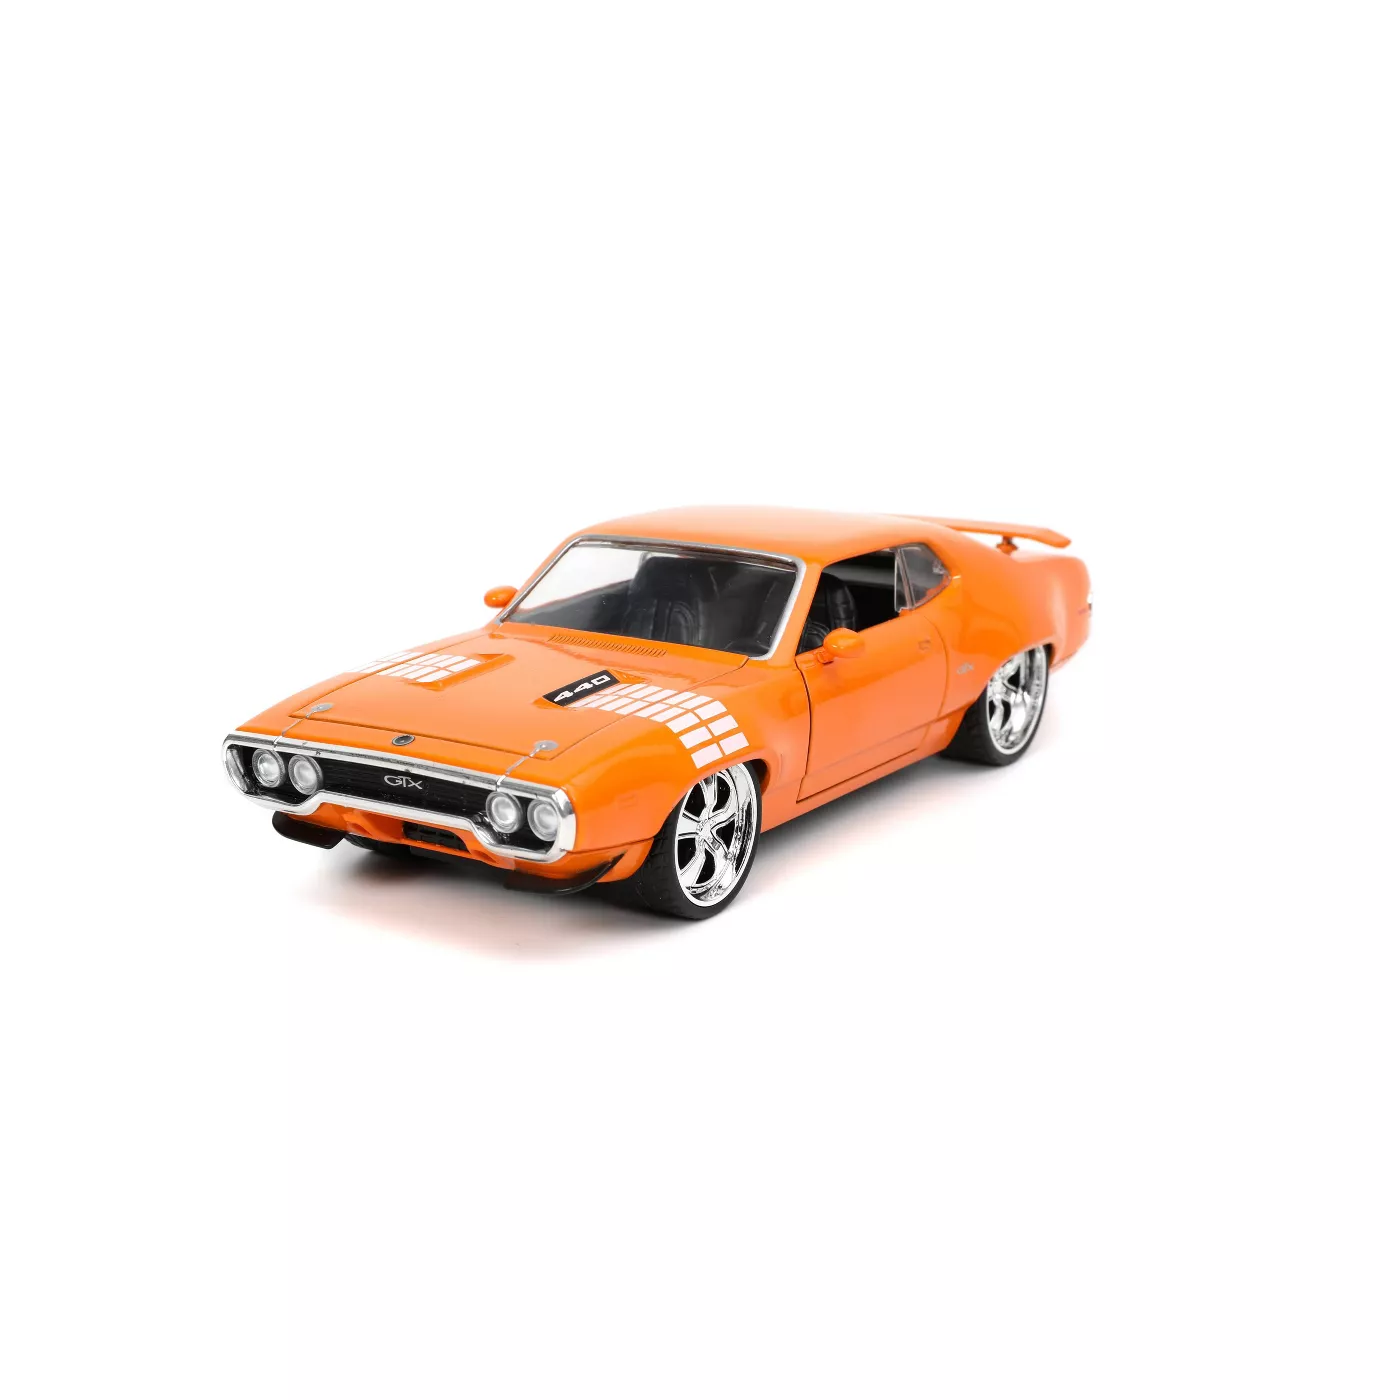 Big Time Muscle 1972 Plymouth GTX 1:24 Scale Die-Cast Vehicle - Orange - image 1 of 5